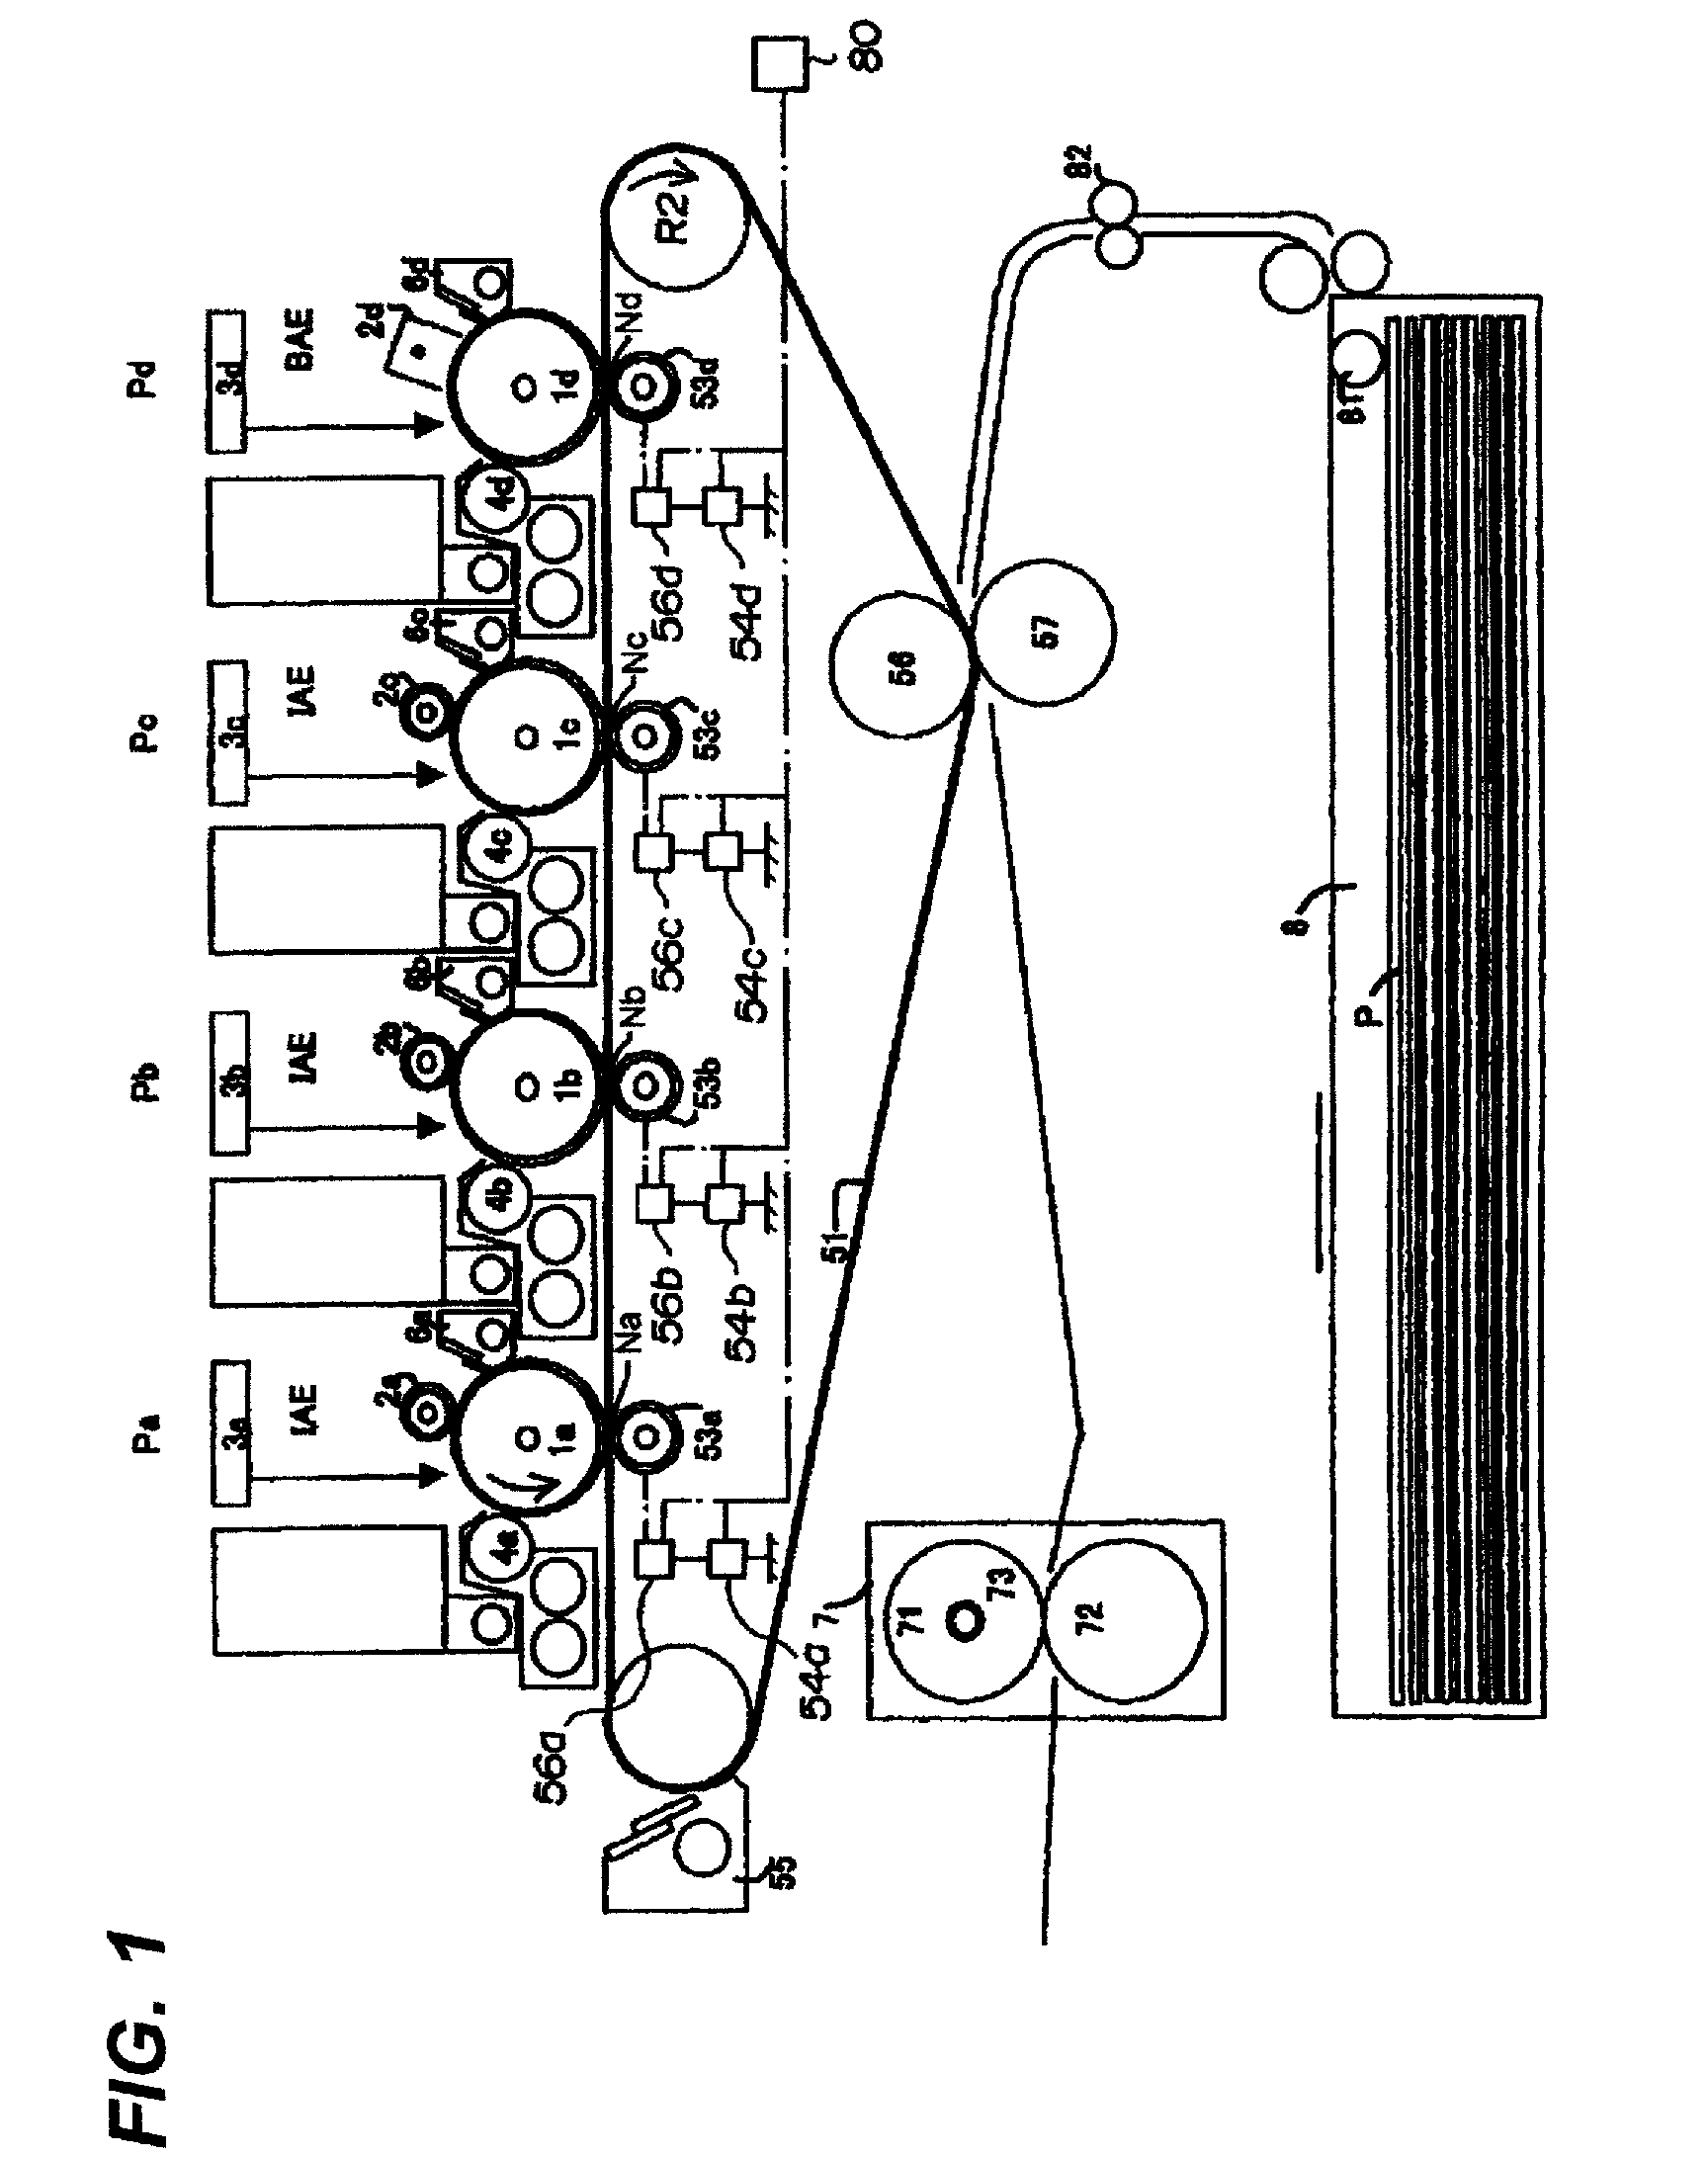 Image forming apparatus with multiple image forming portions and image transfers